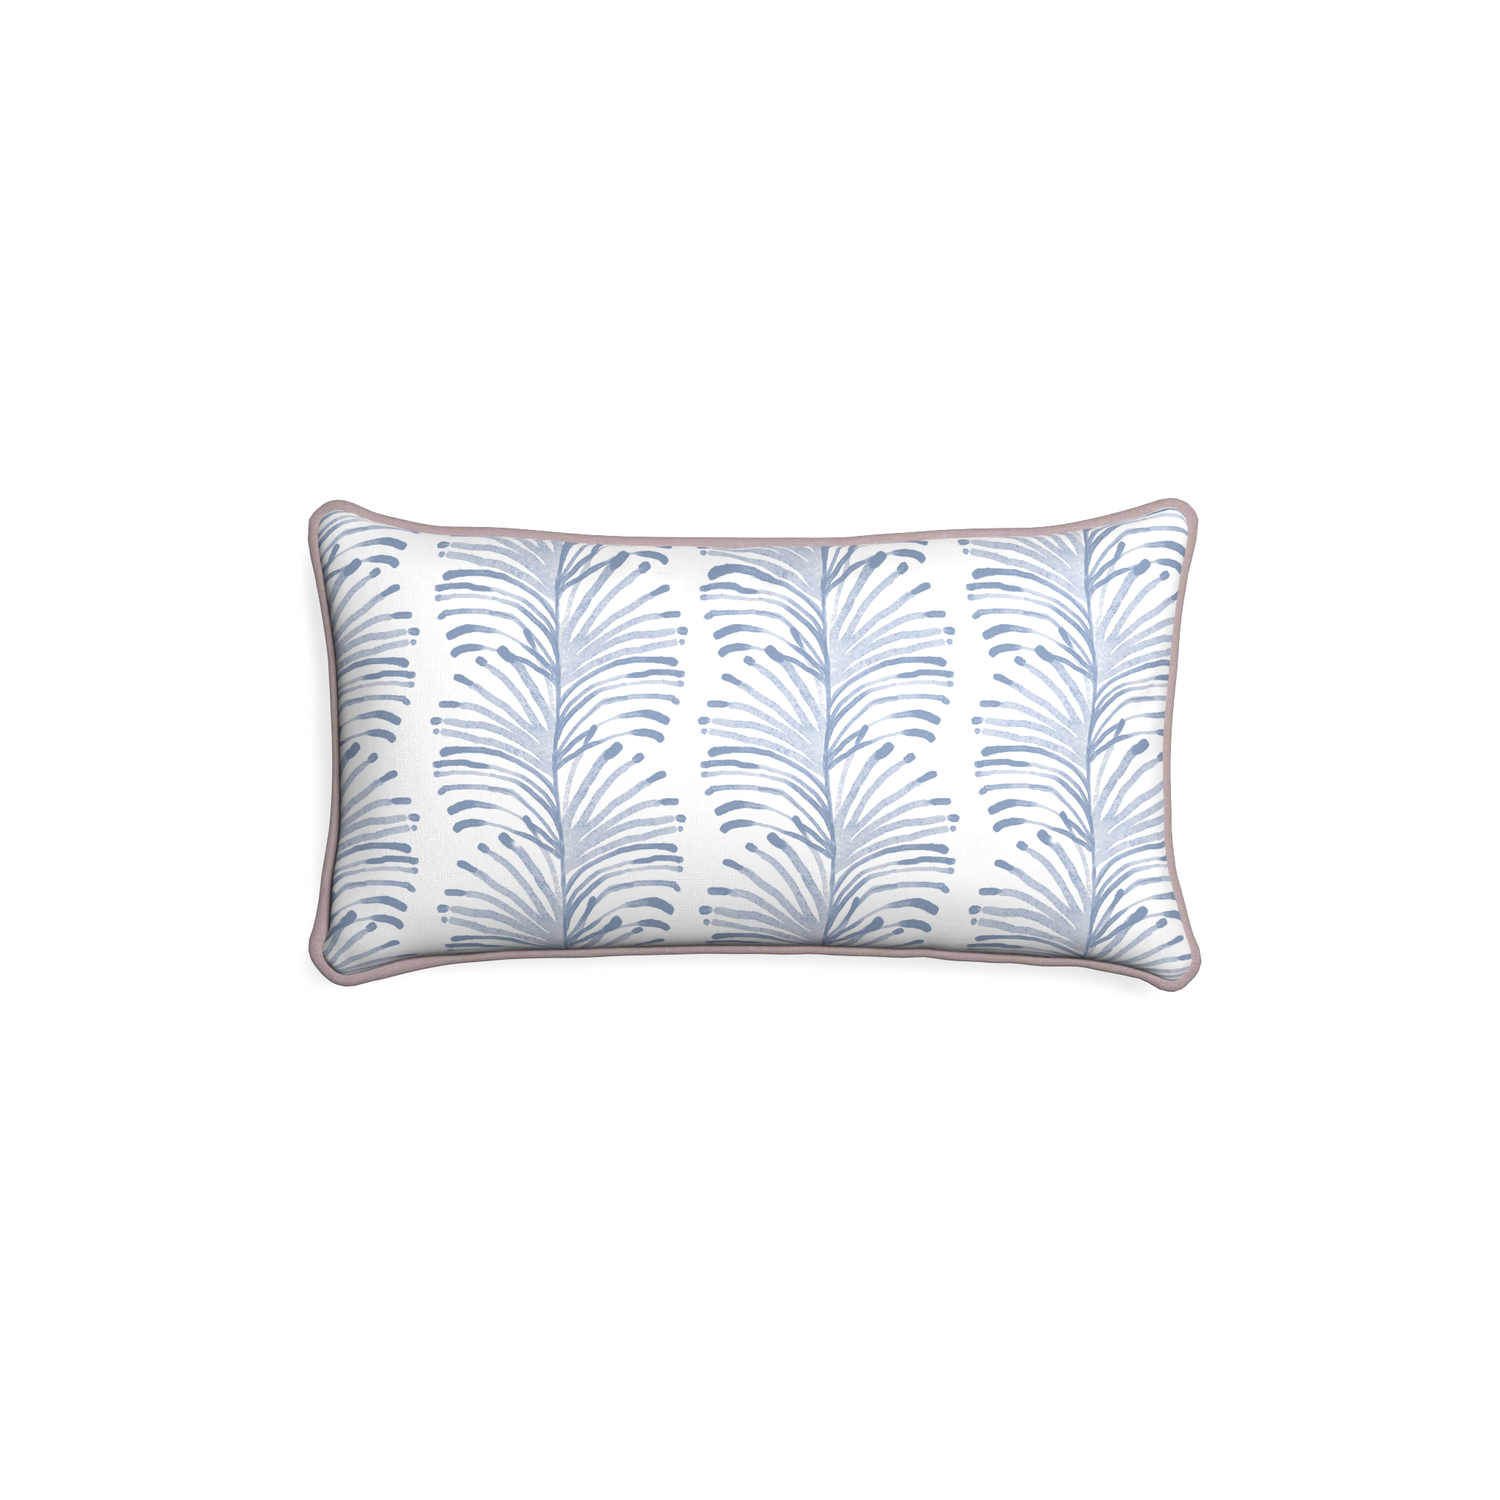 Petite-lumbar emma sky custom sky blue botanical stripepillow with orchid piping on white background